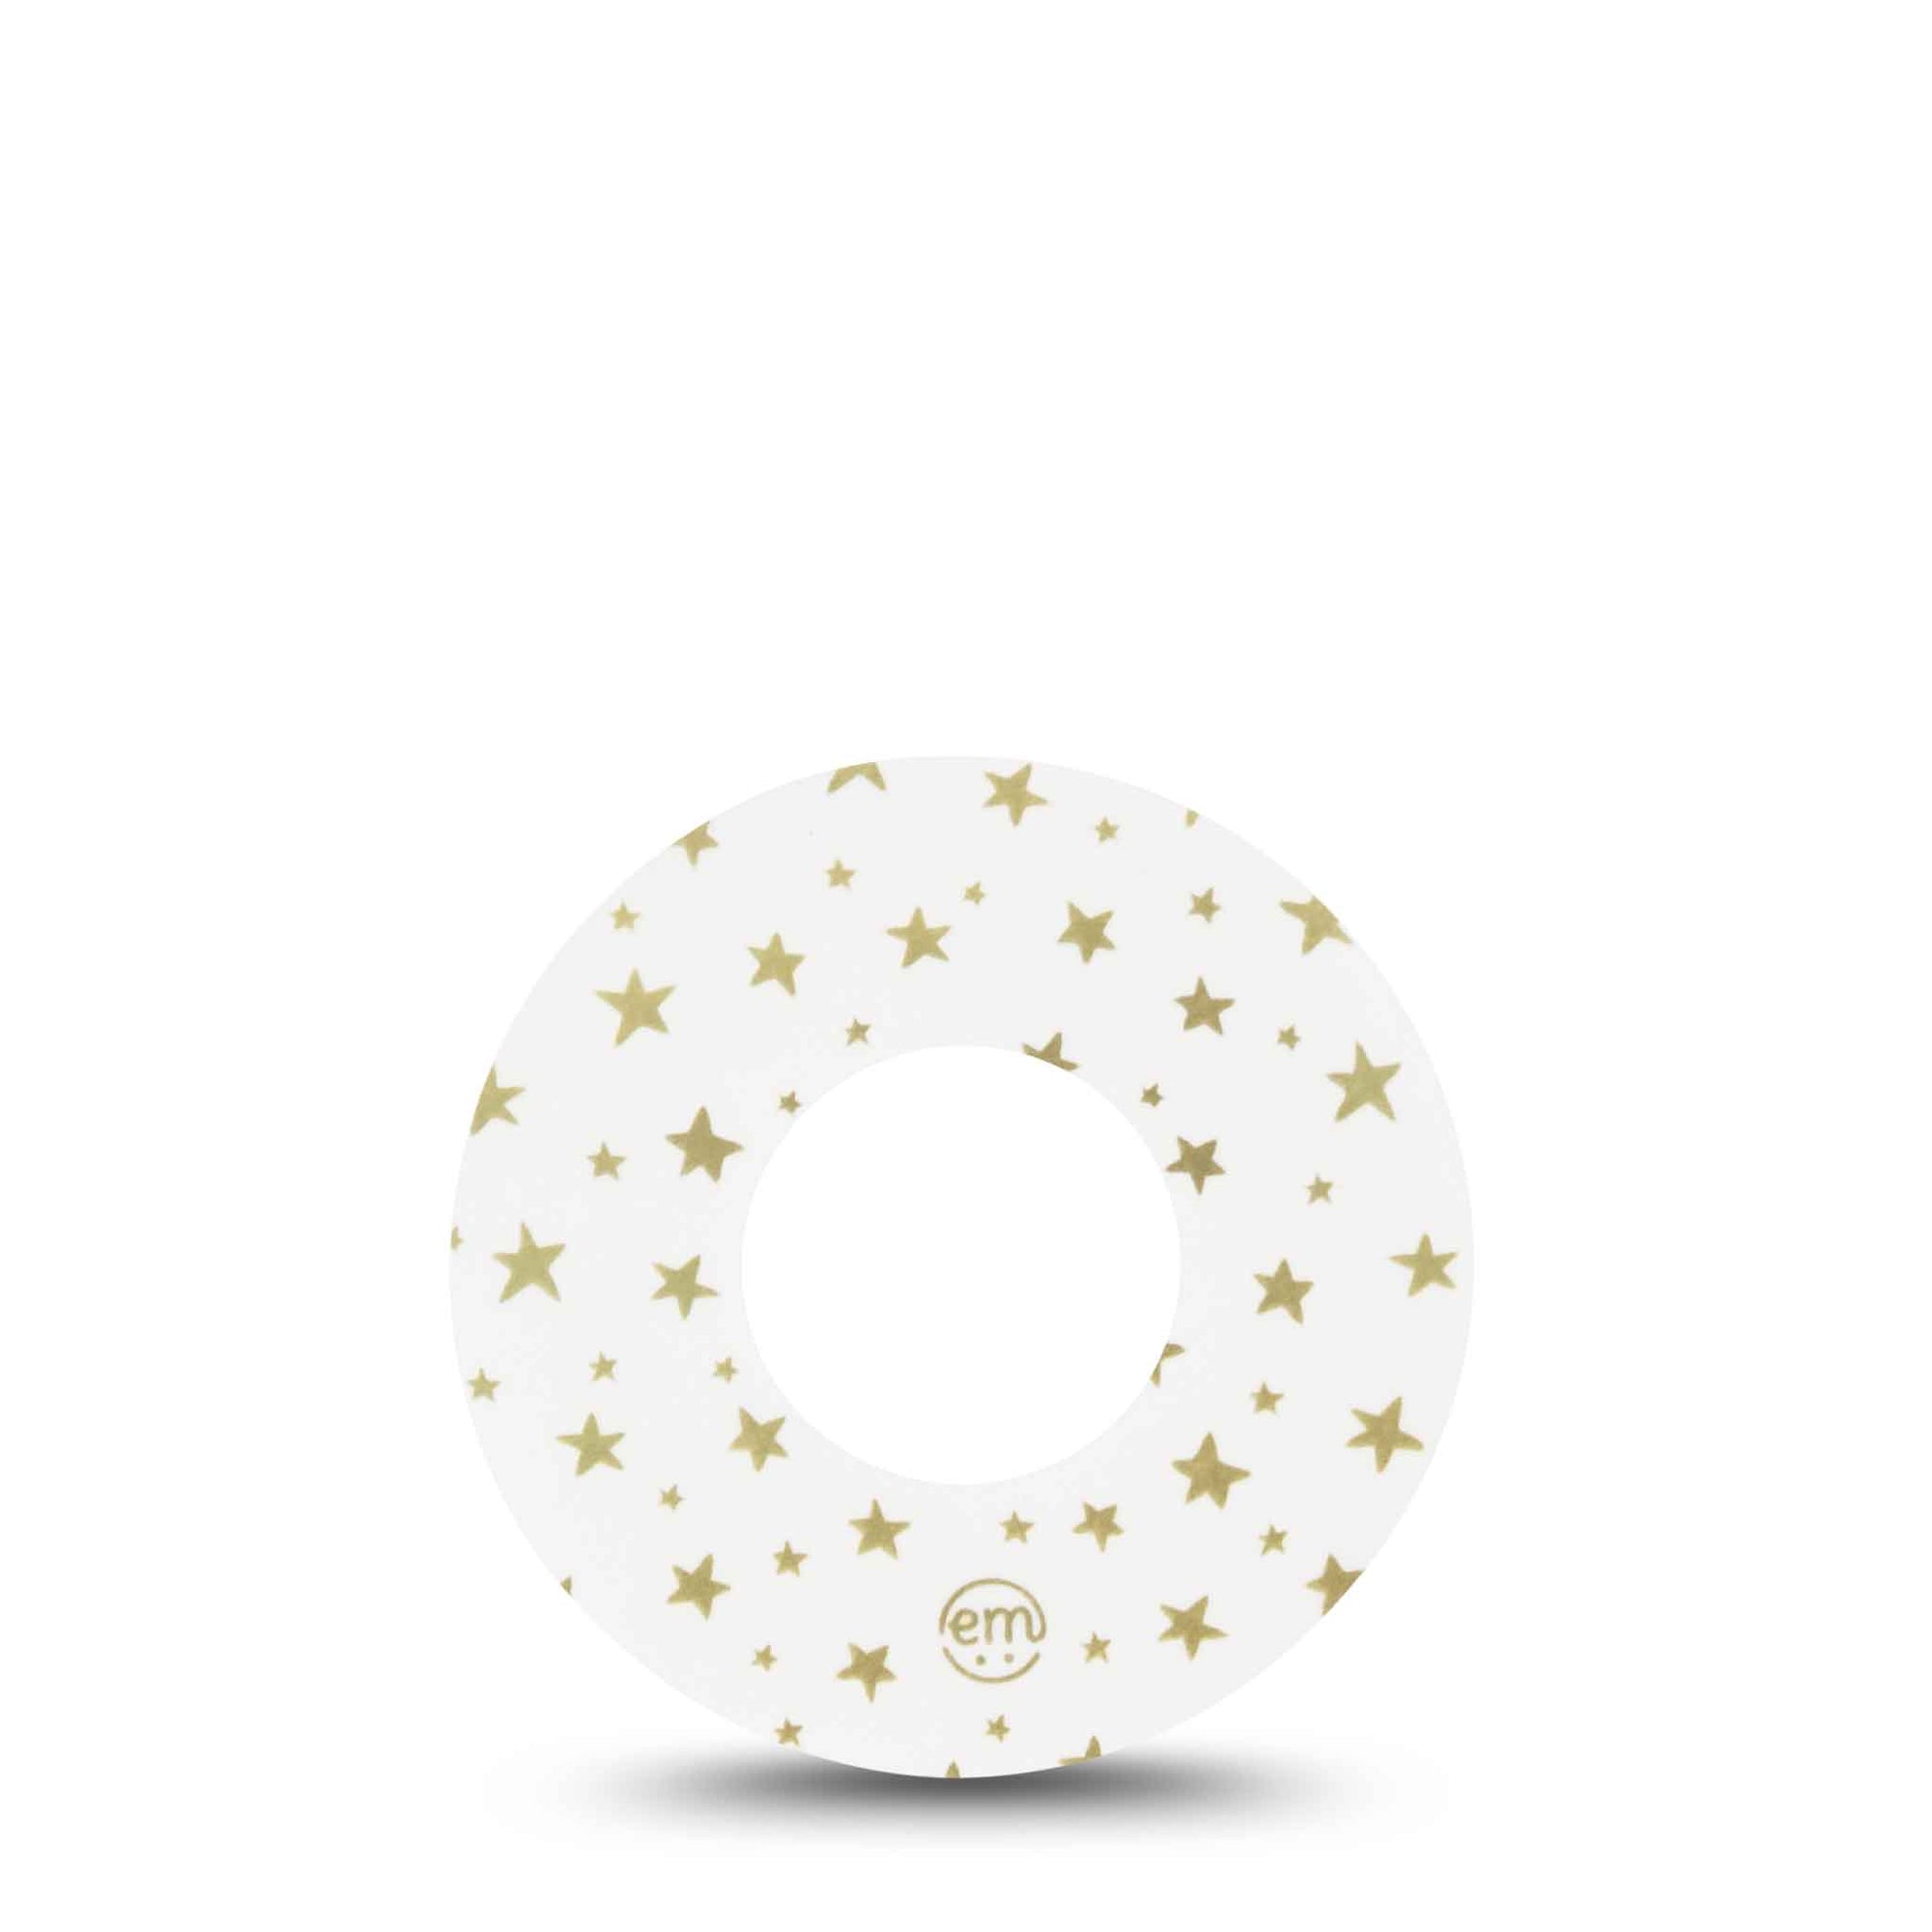 ExpressionMed Twinkling Stars Libre Overpatch, Abbott Lingo